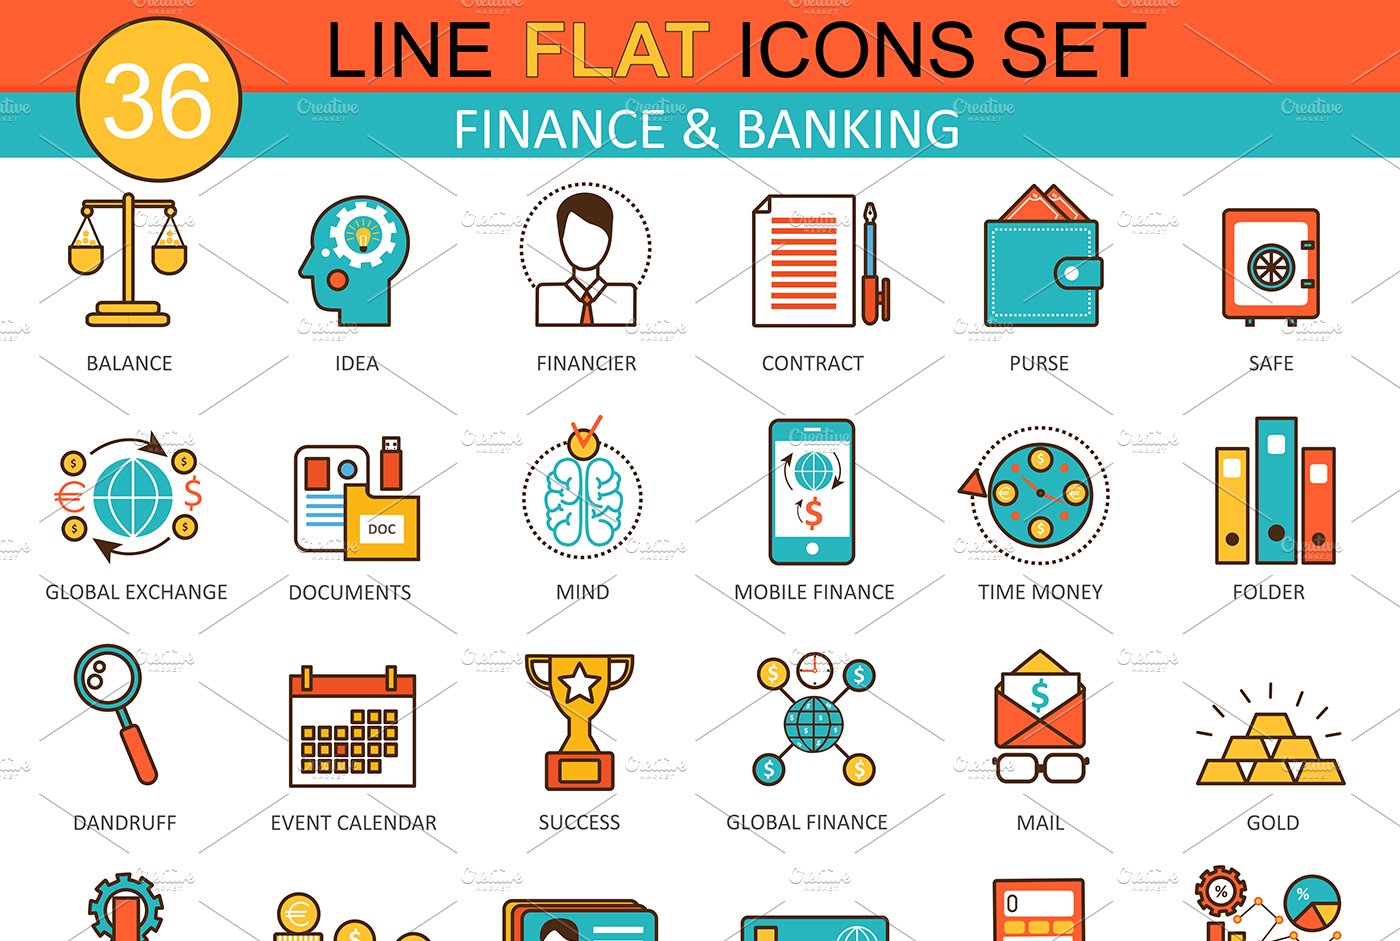 Finance & banking flat line icons cover image.